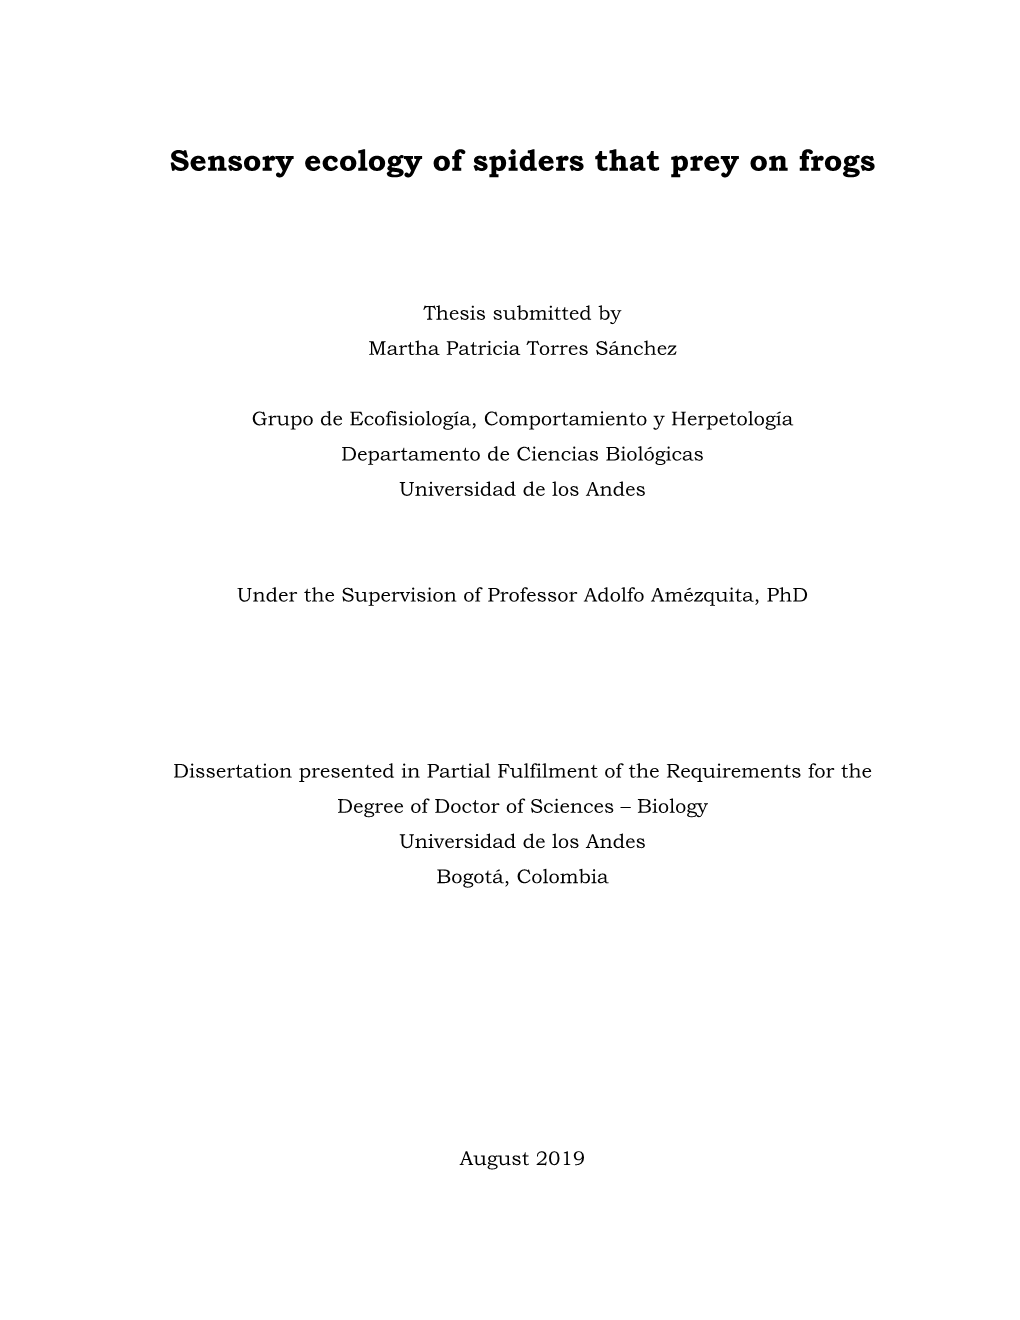 Sensory Ecology of Spiders That Prey on Frogs